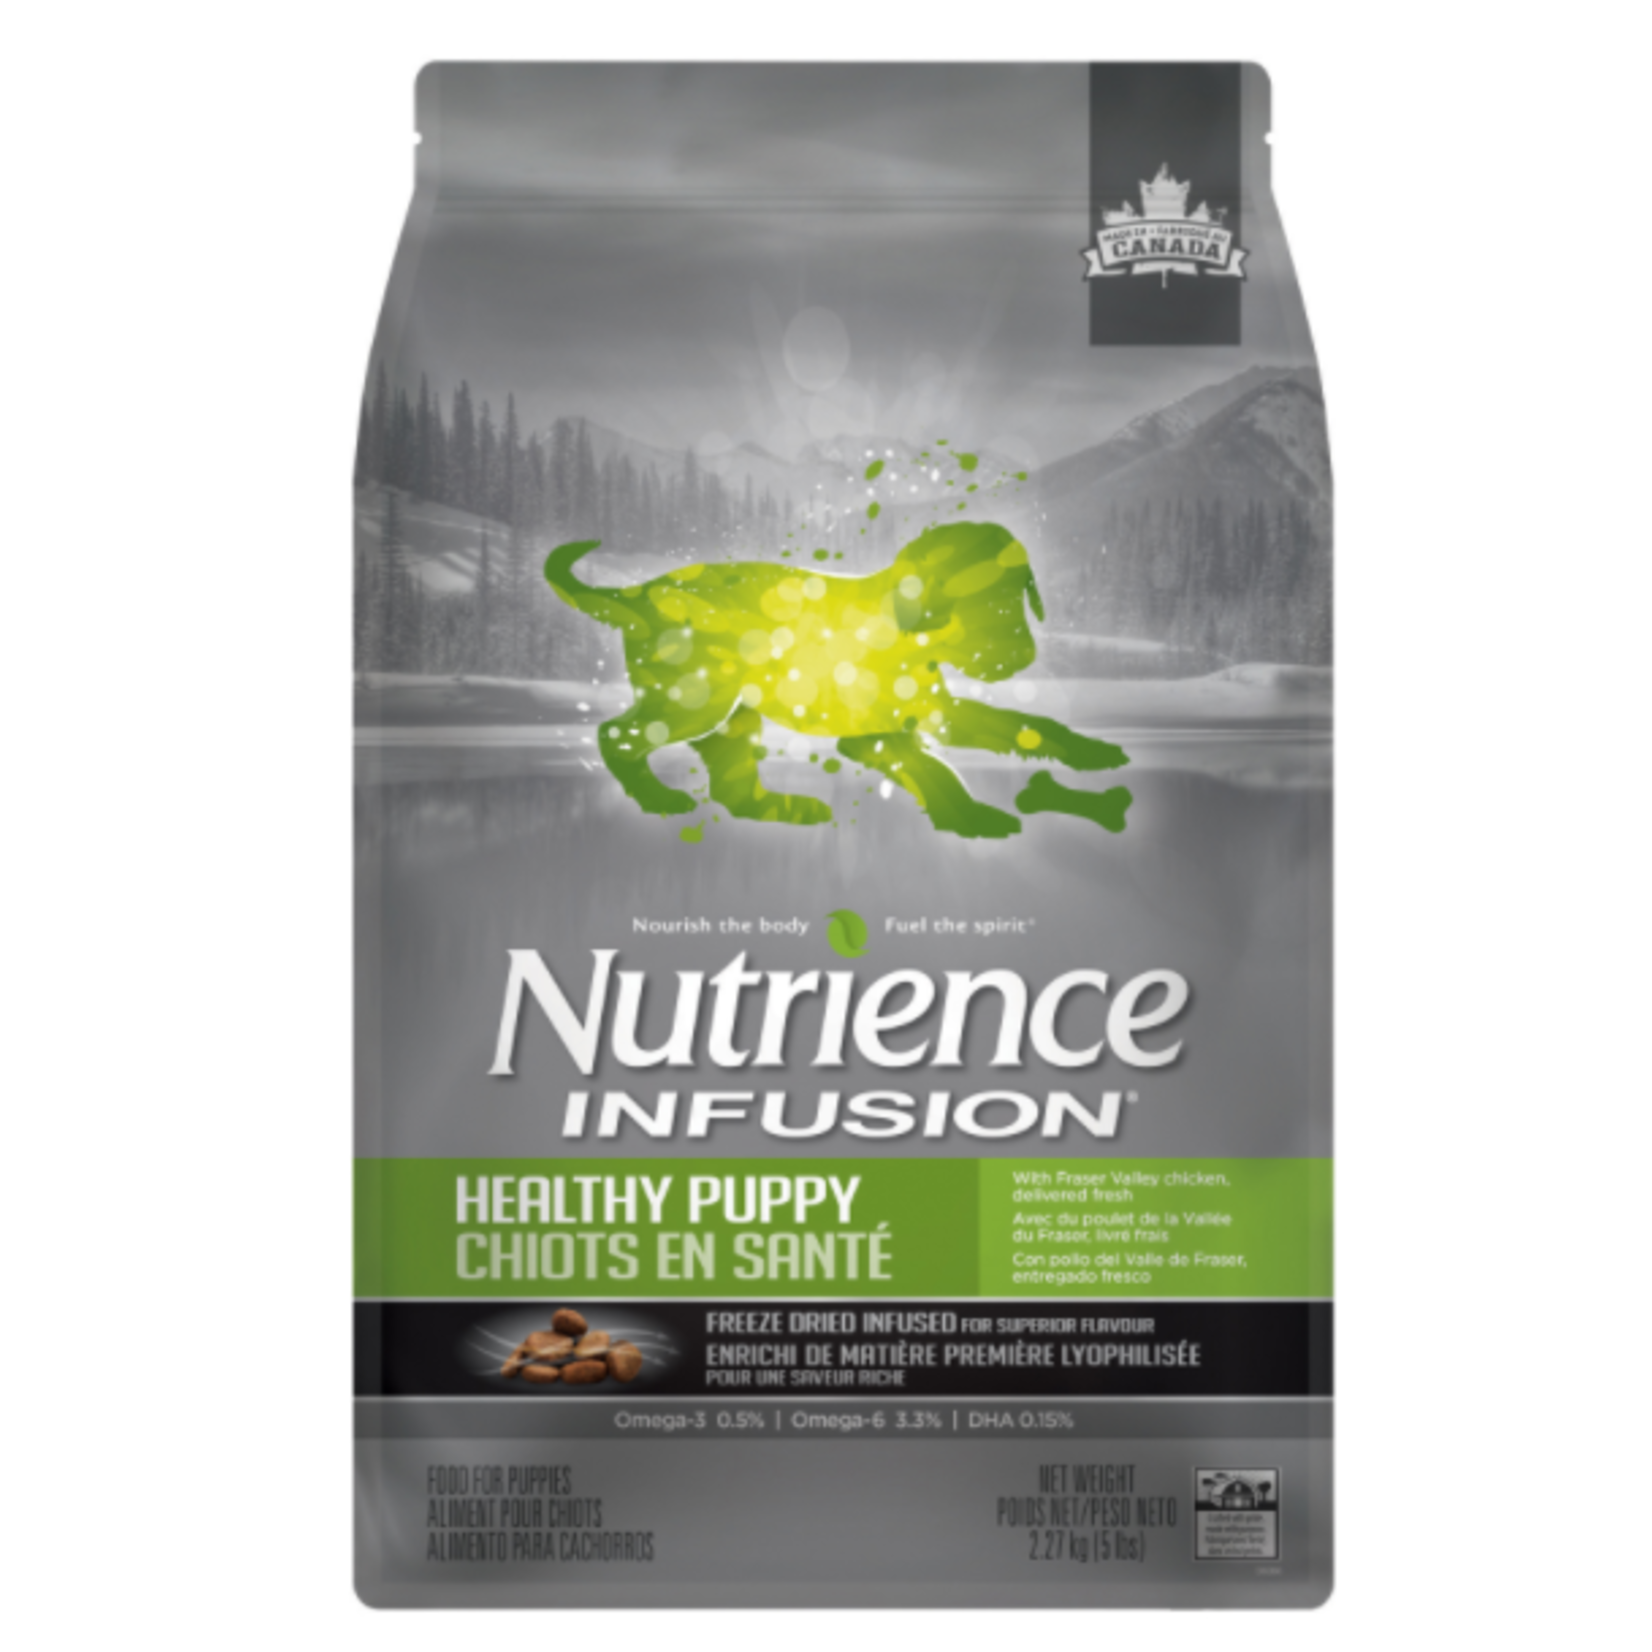 Nutrience Infusion Chiot Sain - Poulet - 5 lbs